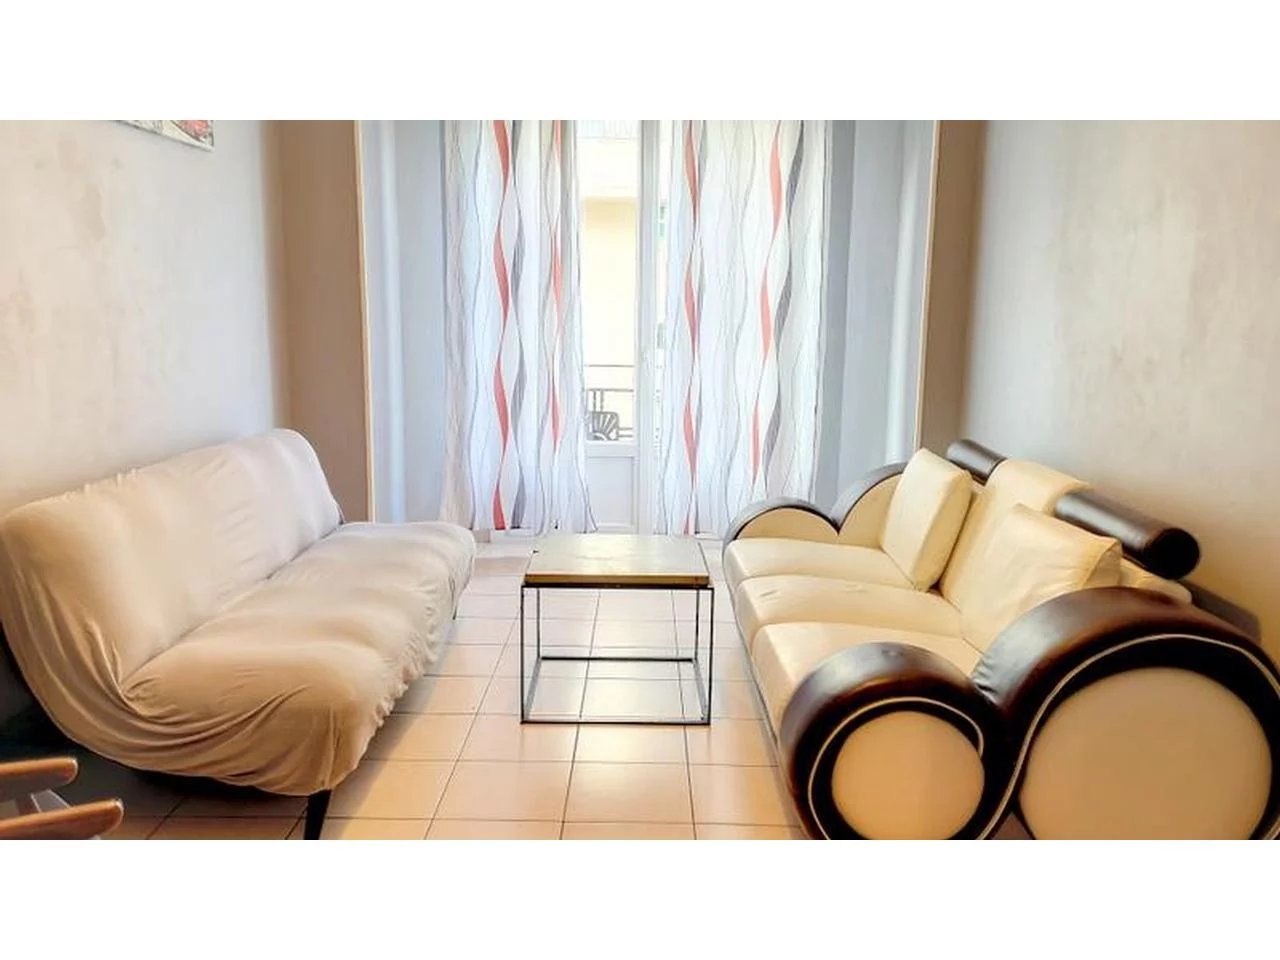 Appartement  2 Rooms 51.13m2  for sale   187 000 €